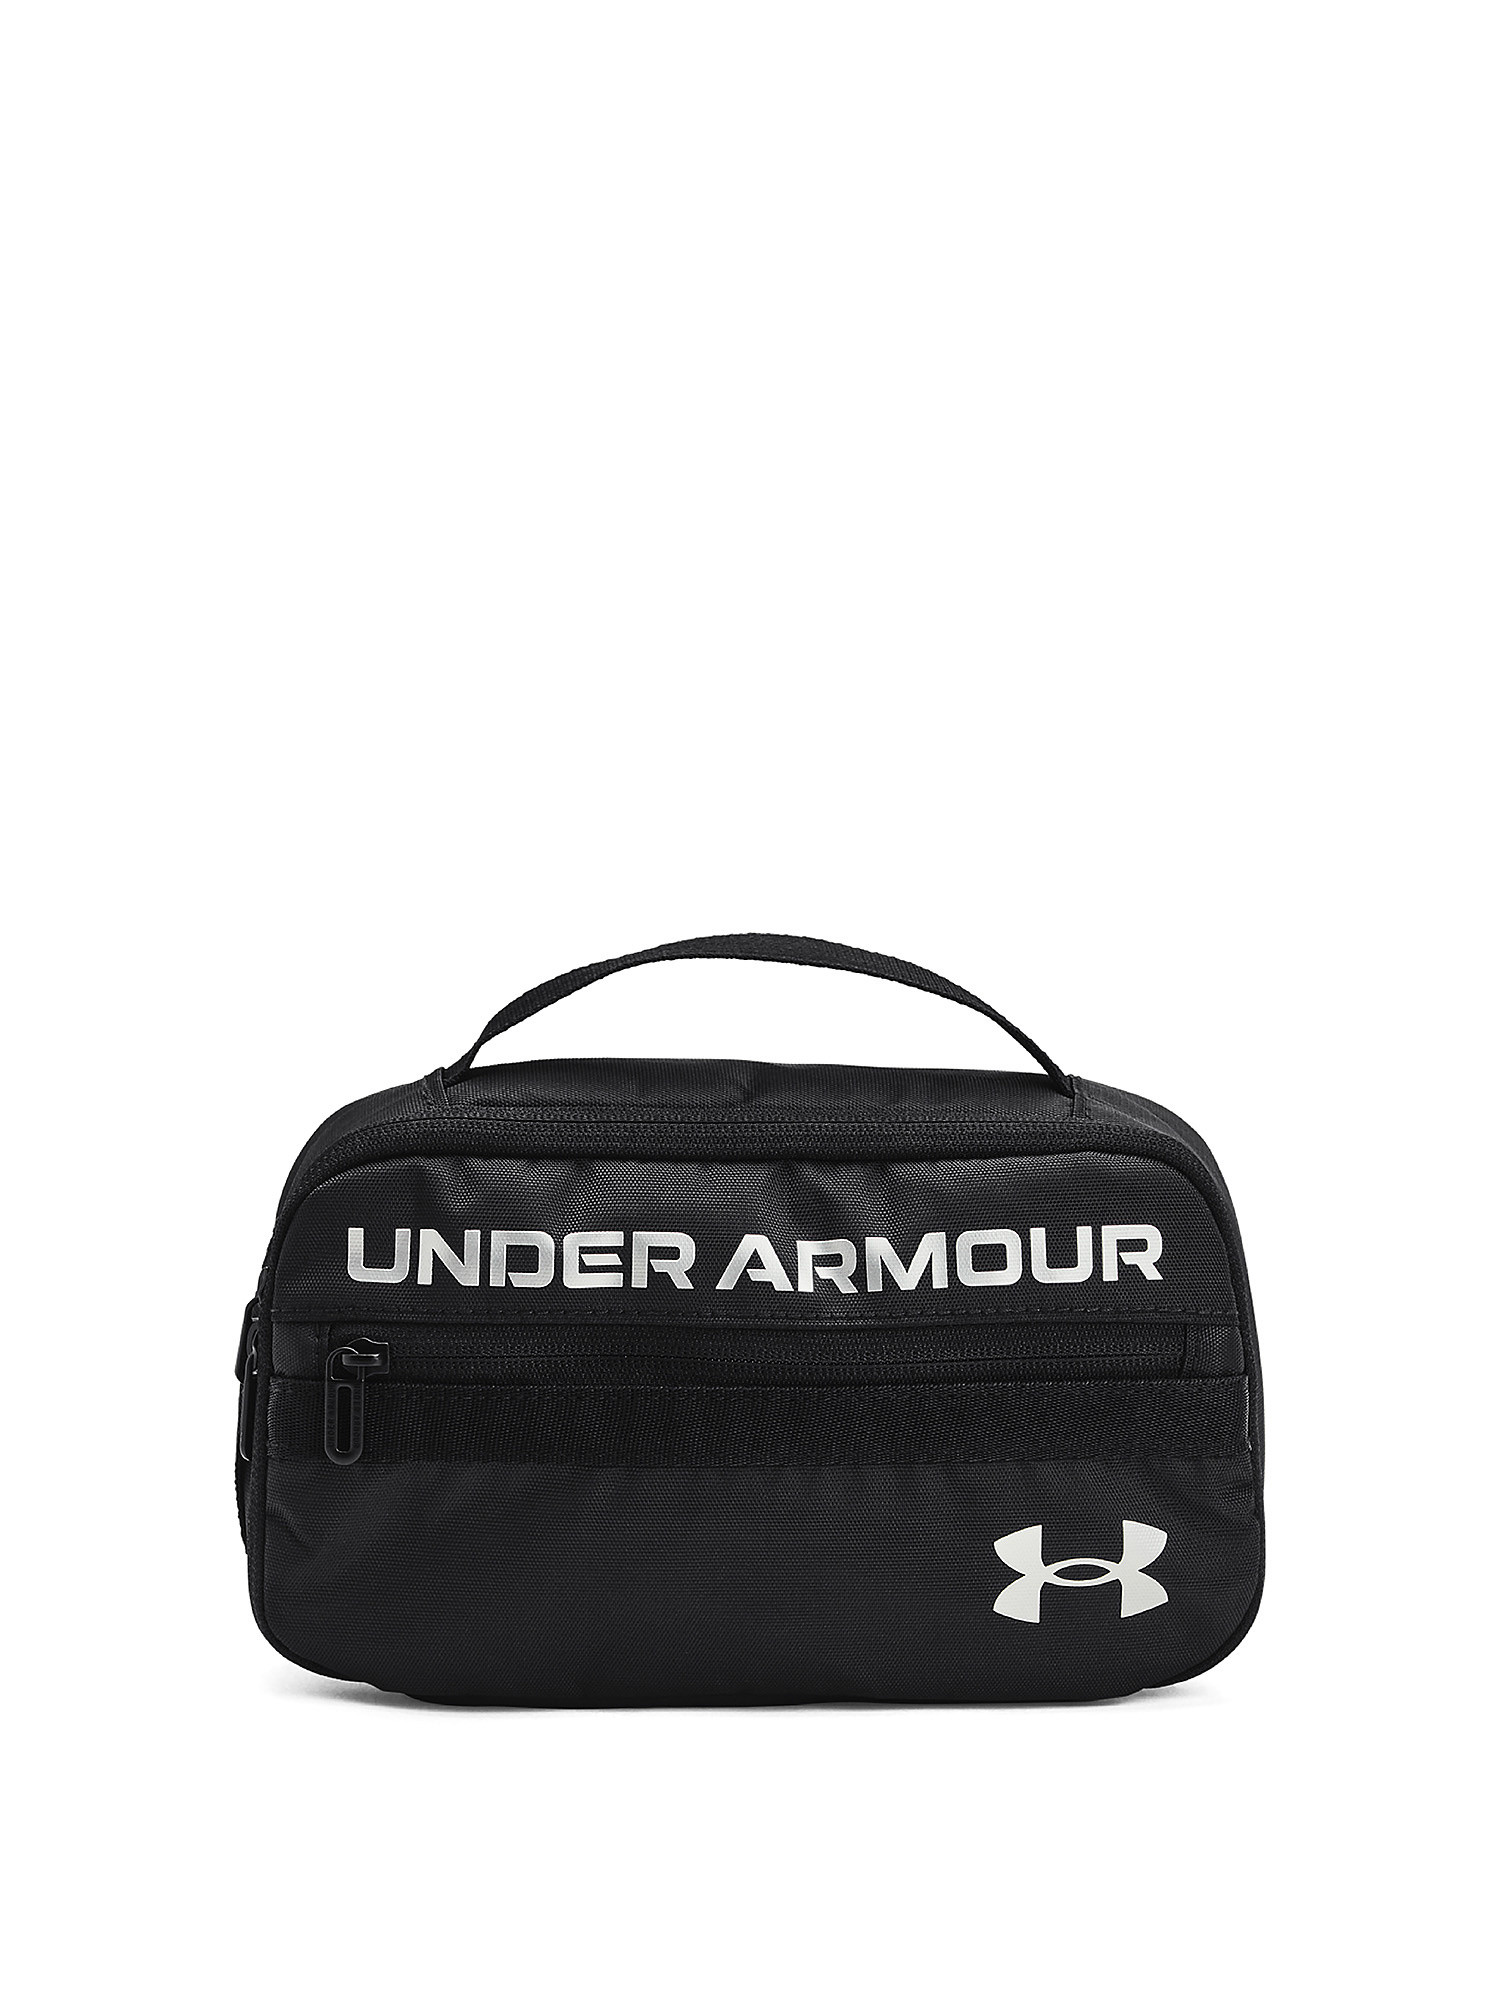 Under Armour - UA Contain Travel Travel Kit, Black, large image number 0